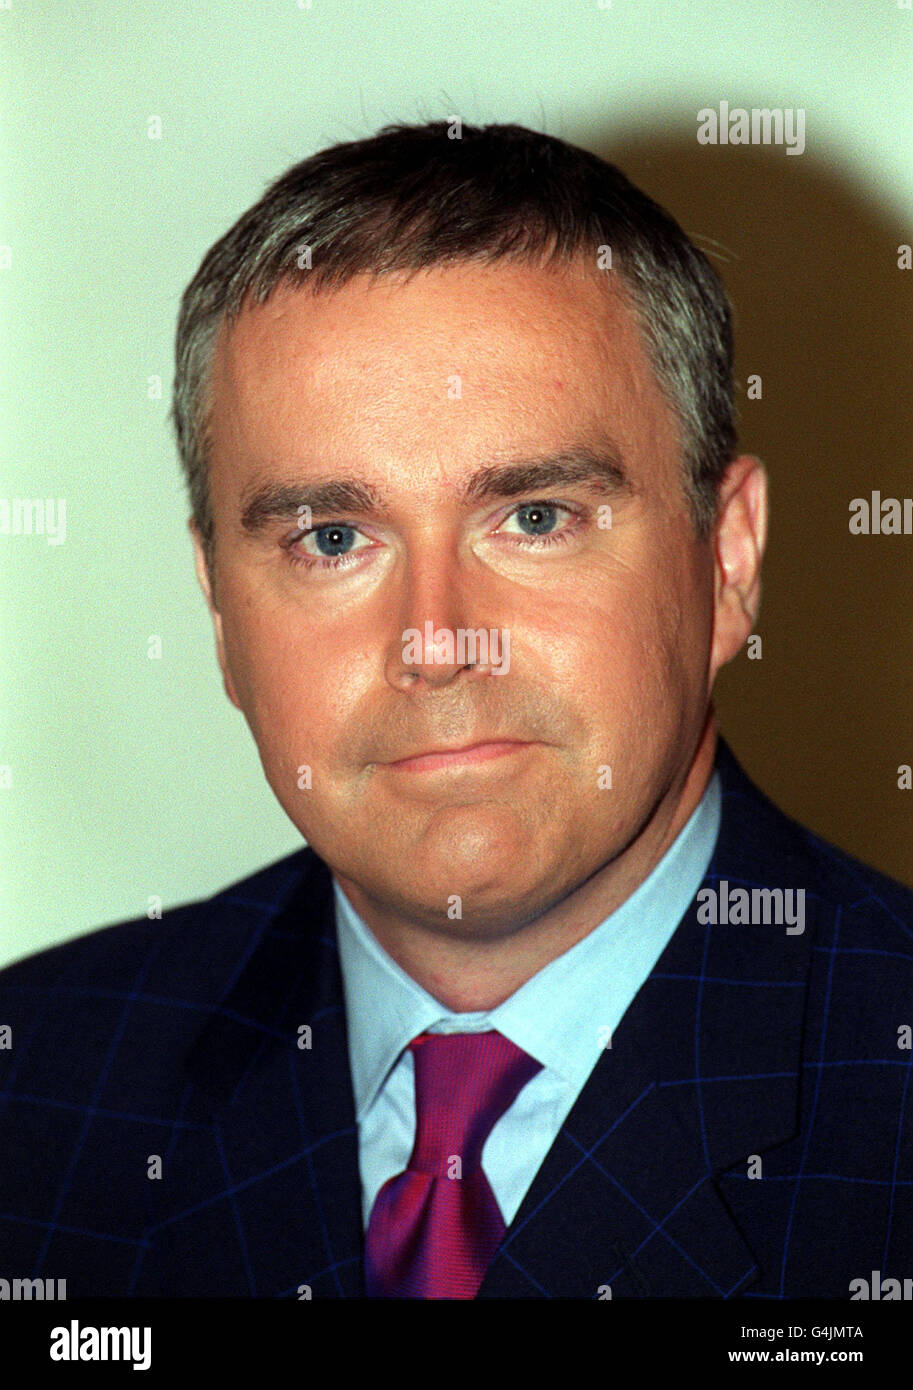 Huw Edwards, the anchor of the new look BBC Six o'clock News. The new team of presenters and correspondents were unveiled during a photocall in London. * 4/9/02: Huw Edwards was named as the new anchor of BBC1's 10 O'Clock News bulletins. Fiona Bruce (right) will be the second presenter. They replace the outgoing anchors Michael Buerk and Peter Sissons, who for years have been the main men for thec channel's nightly bulletins, and who separately announced their departures recently. Stock Photo